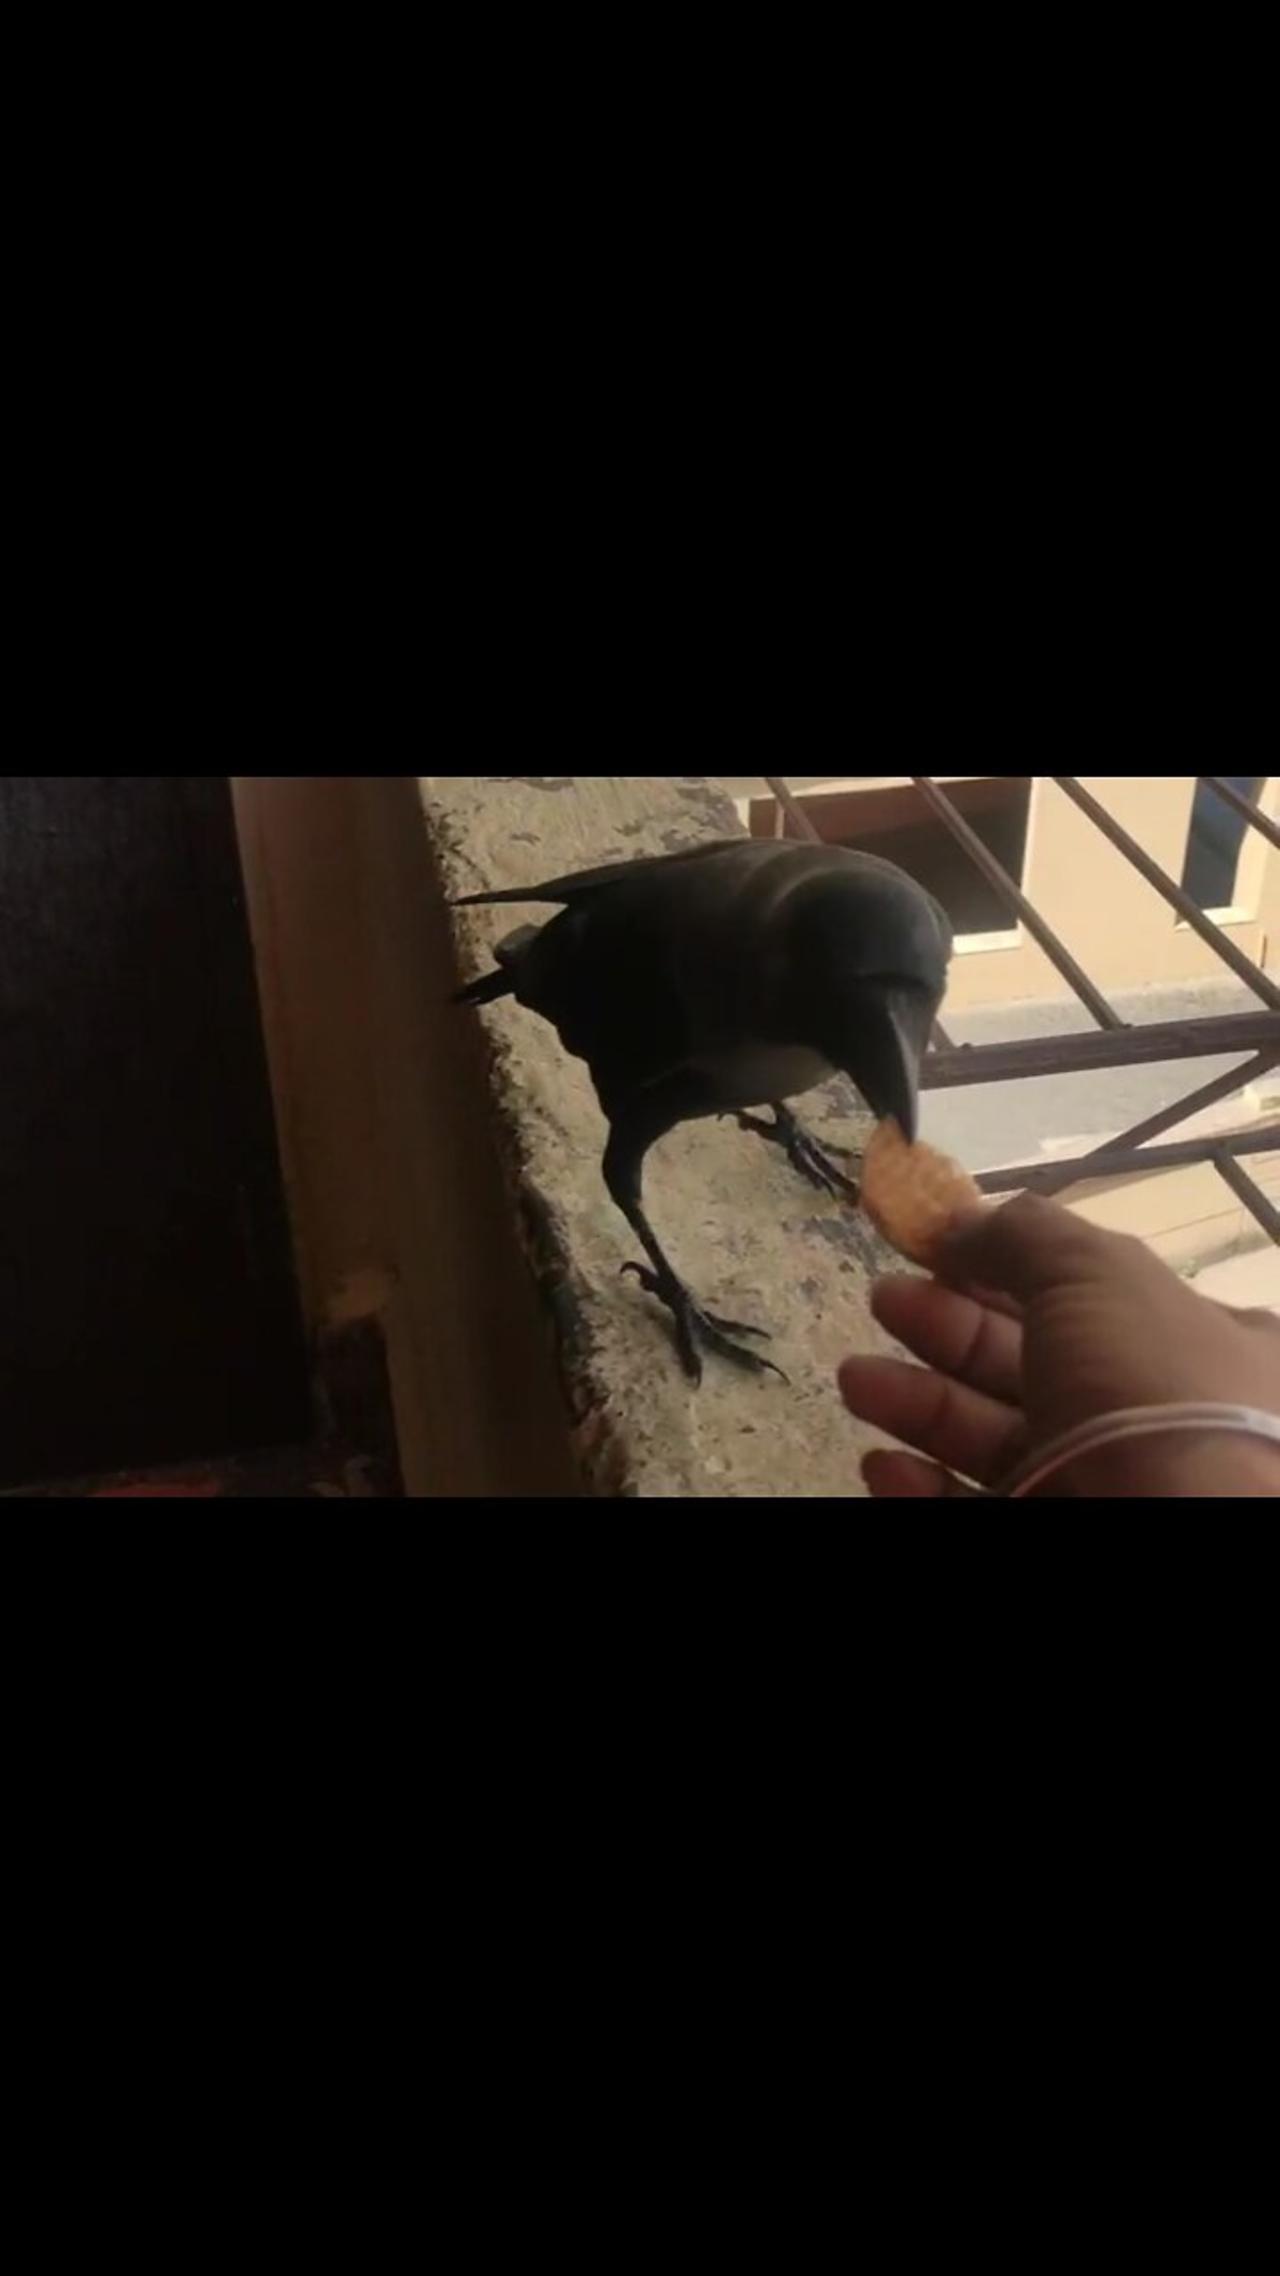 Indian house crow training funny video. Try not to laugh